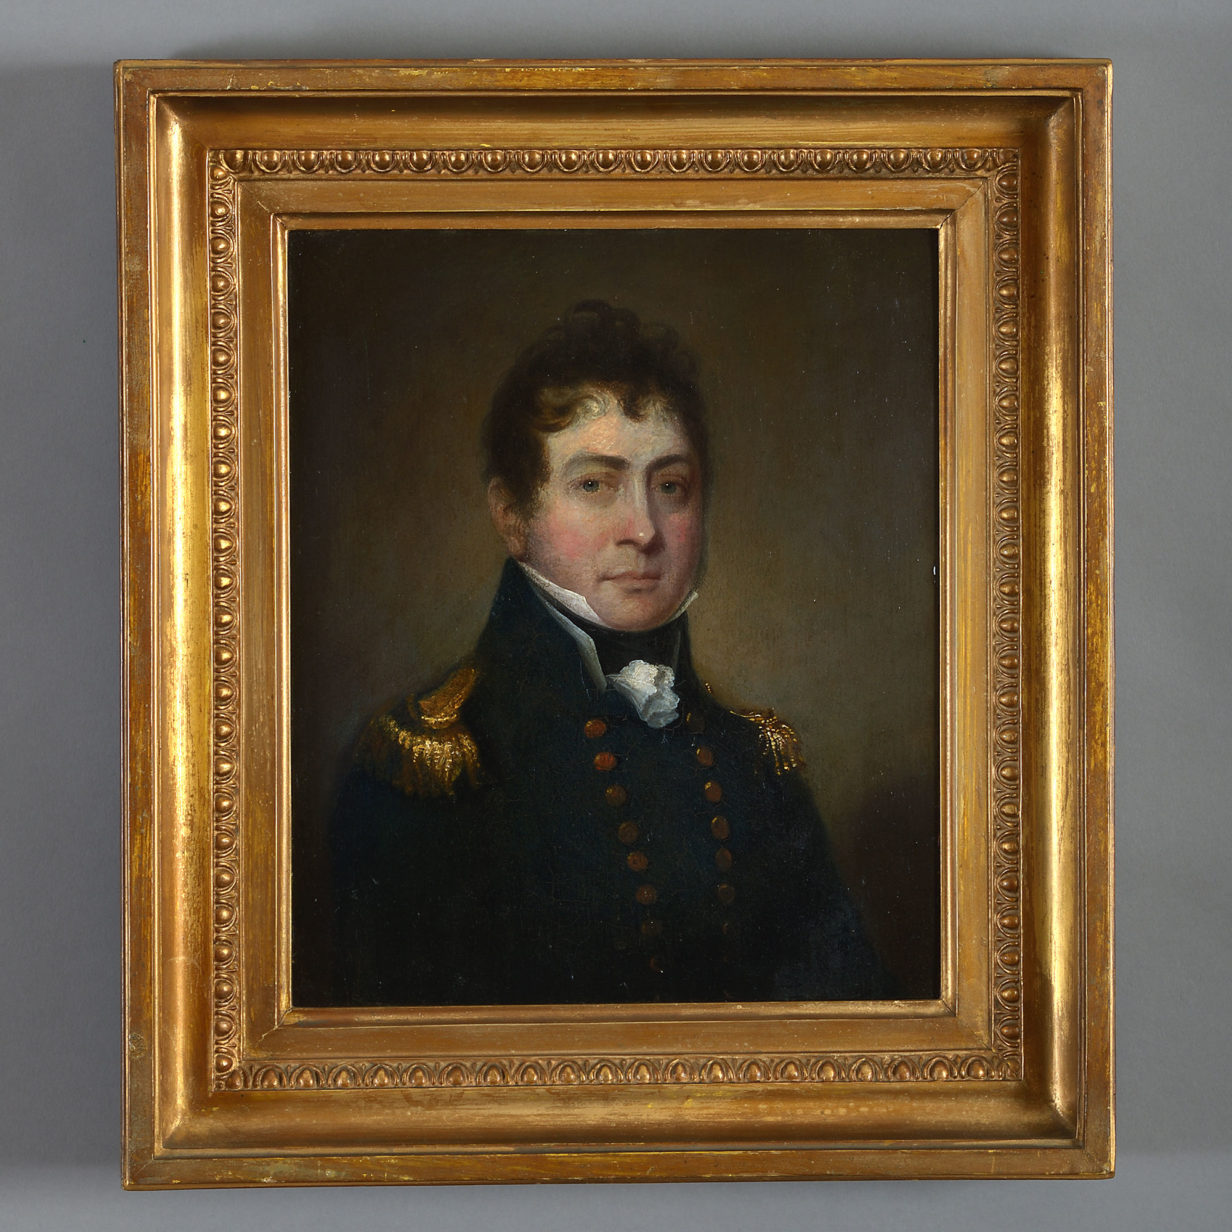 Early 19th century regency period portrait of a naval officer